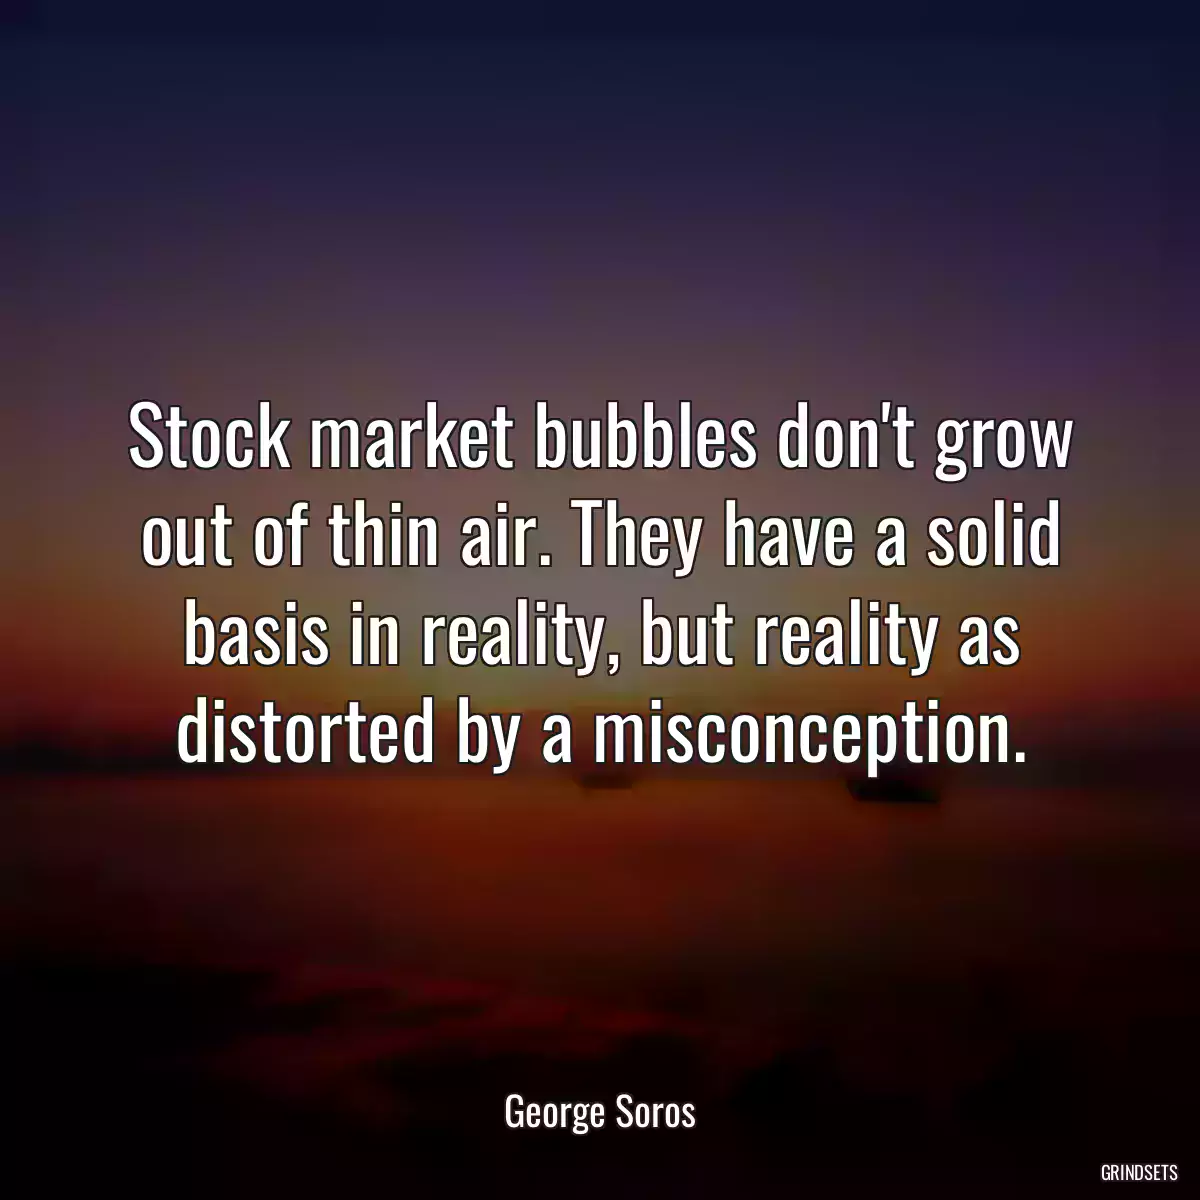 Stock market bubbles don\'t grow out of thin air. They have a solid basis in reality, but reality as distorted by a misconception.